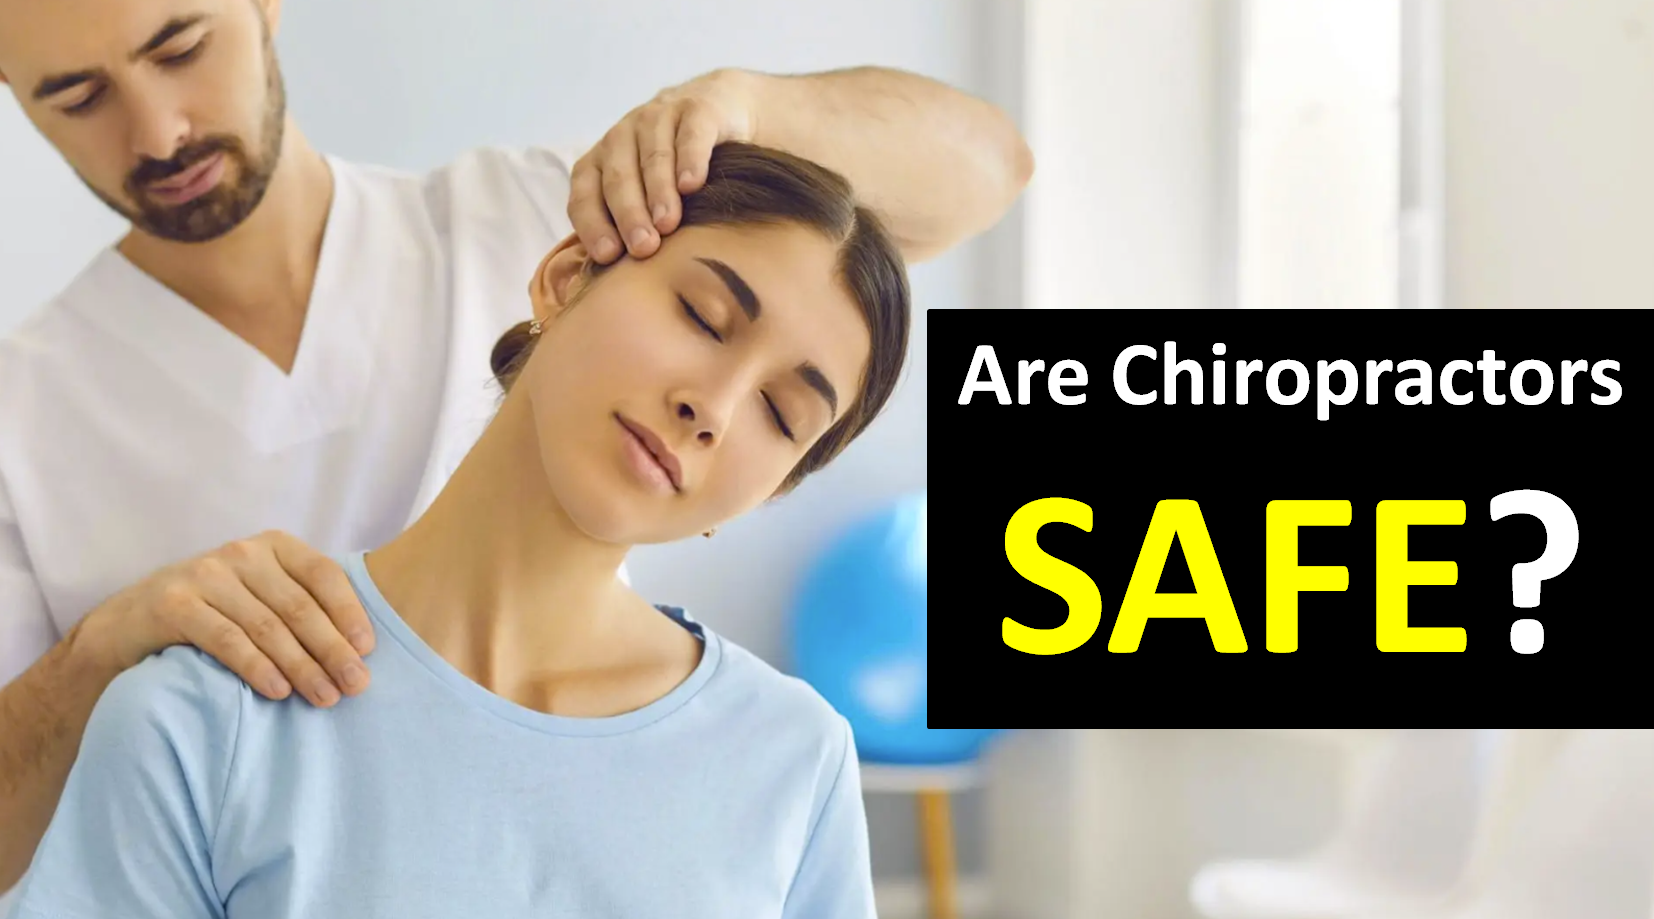 Are Chiropractors Safe? Is Chiropractic Safe?